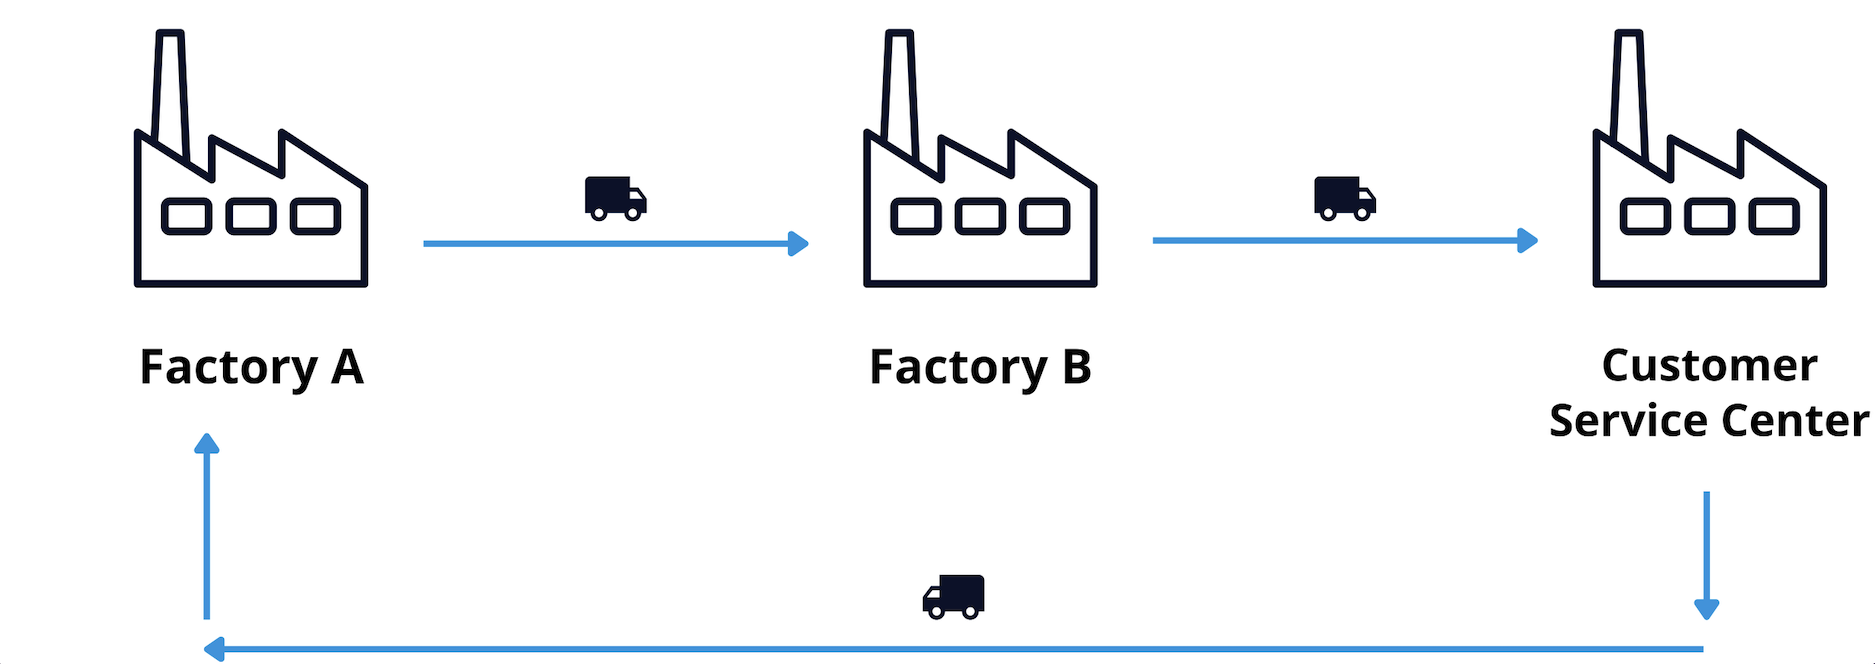 Material Flow Tracking: Packaged and finished goods are tracked from Factory A to the external warehouse in Factory B. A partial quantity of the goods are then unloaded at one of the company’s customer service centers.